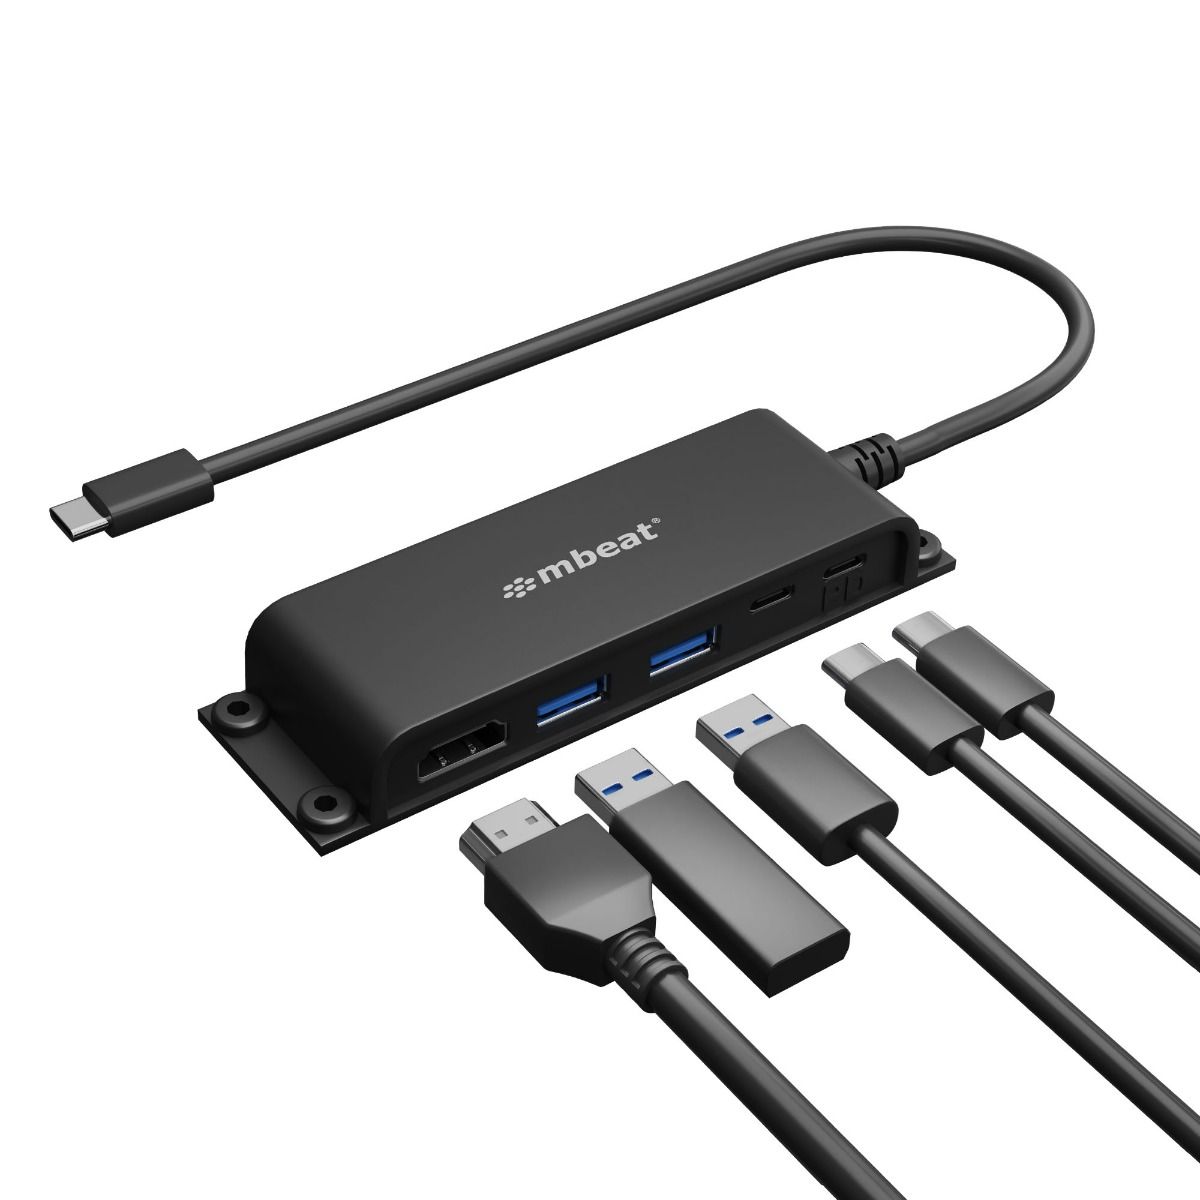 Adapters/MBEAT: mbeatÂ®, Mountable, 5-Port, USB-C, Hub, -, Supports, 4K, HDMI, video, out, and, 60W, Power, Delivery, Charging, with, 2, Ã—, USB3.0, and, 1, Ã, 